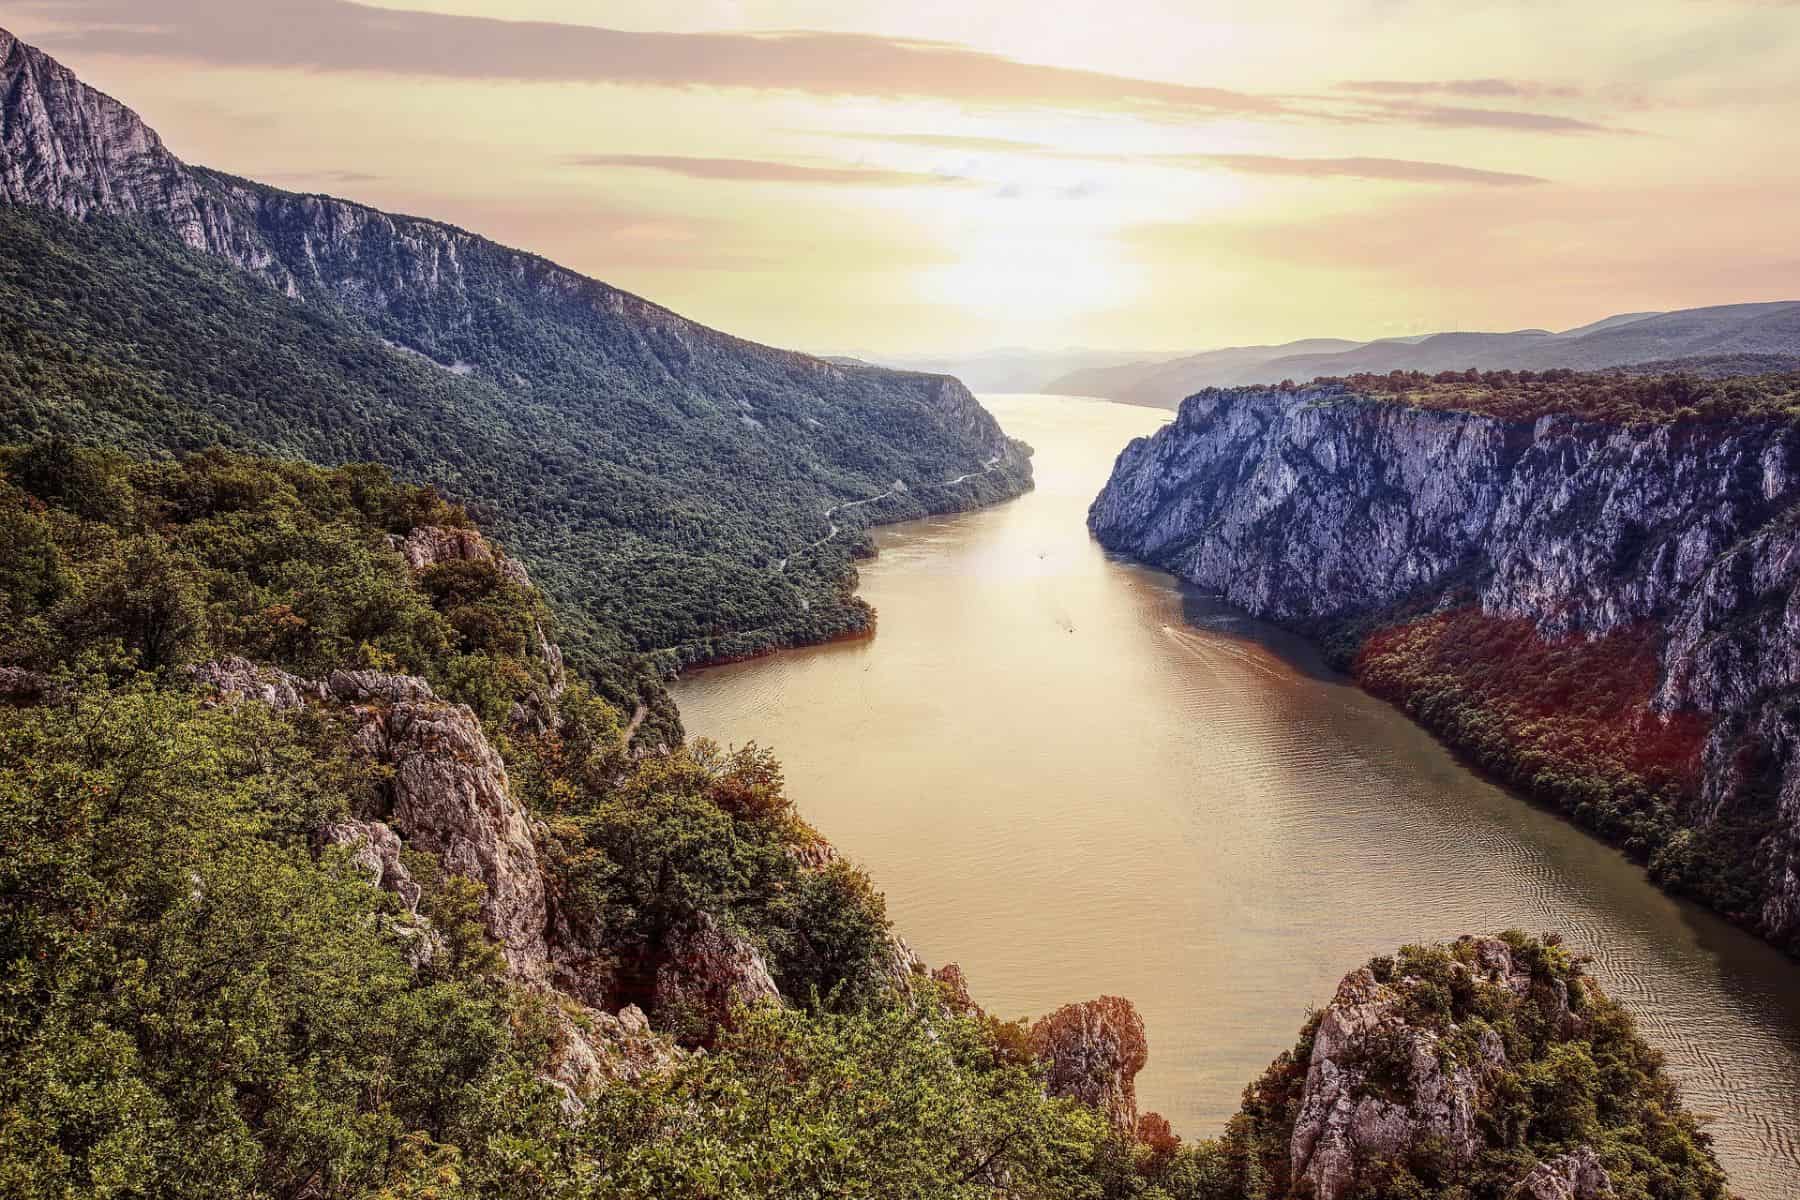 The Iron Gates of the Danube River, on the border between Serbia and Romania